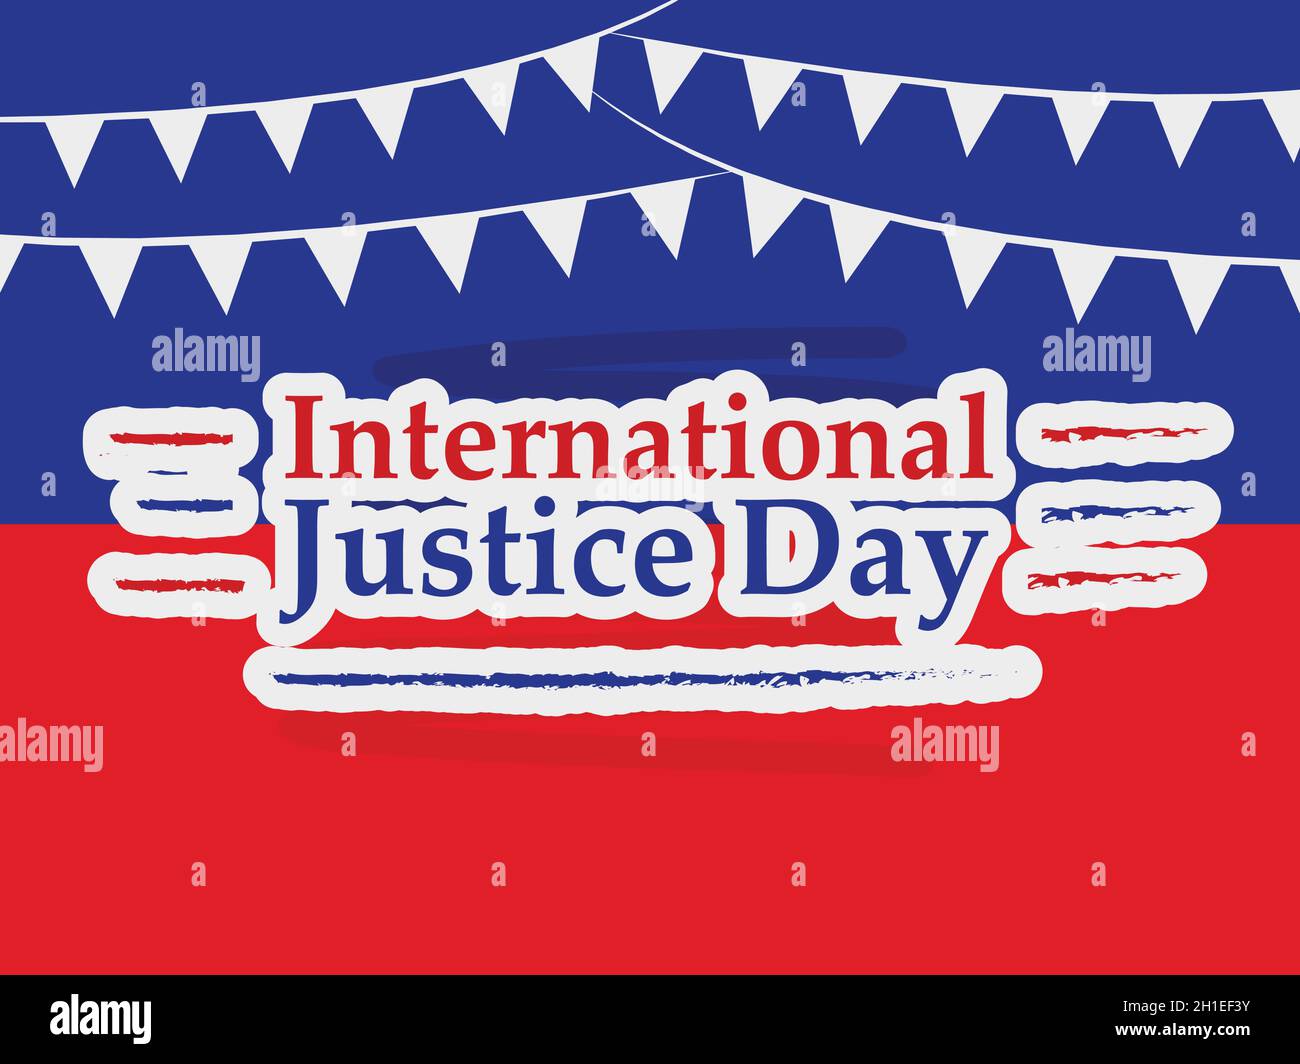 International Justice day background Stock Vector